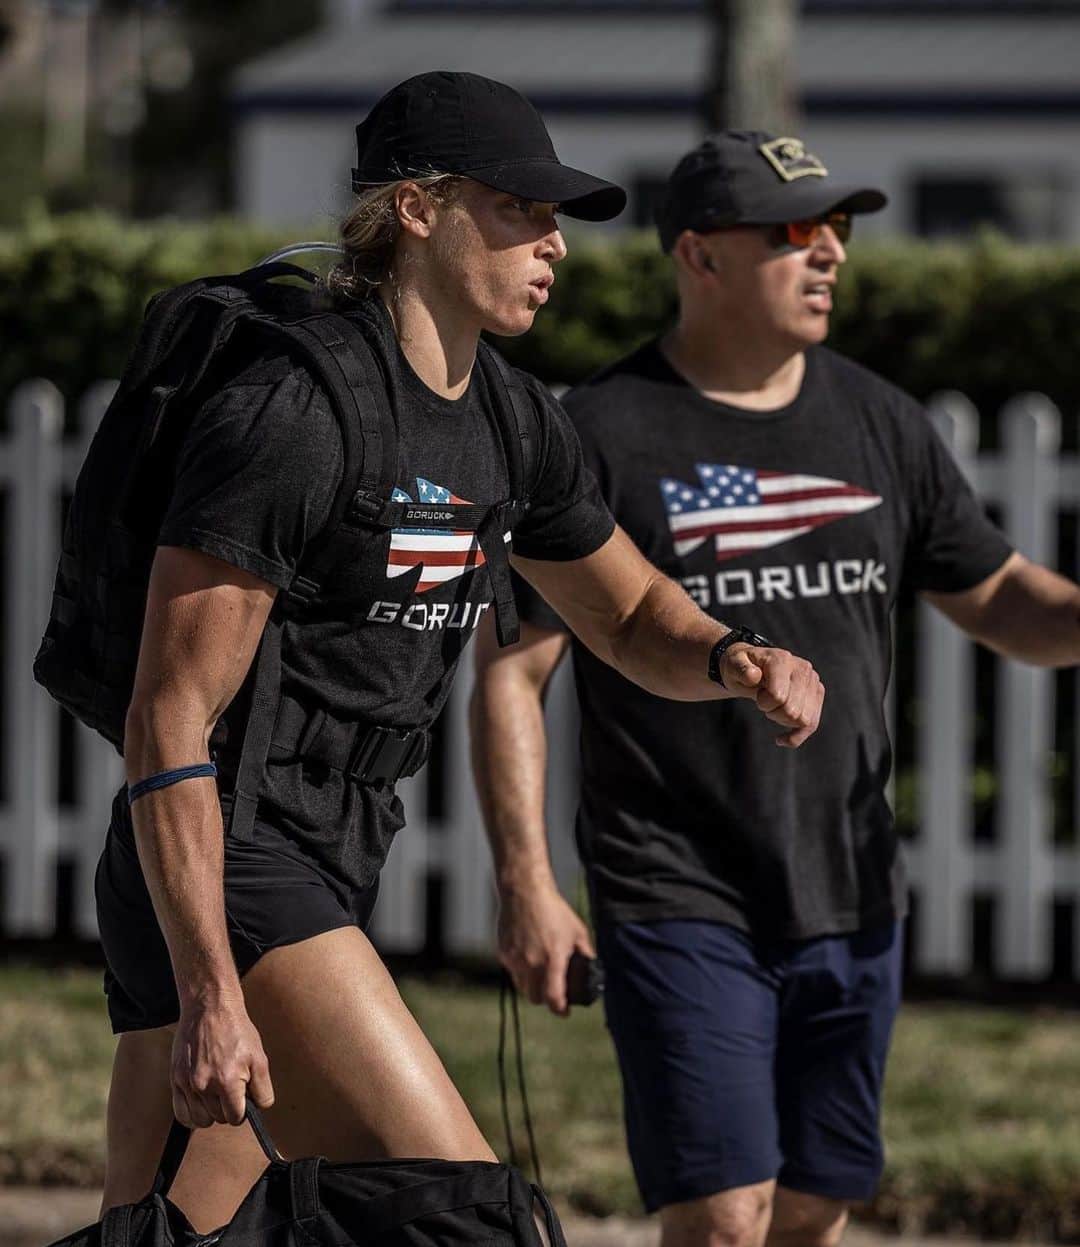 カーリー・ウォパットさんのインスタグラム写真 - (カーリー・ウォパットInstagram)「GORUCK GAMES // EVOLUTION 001: BFF   We arrived at GORUCK headquarters by 3 PM on Friday April 21st, greeted by a cadre of special forces veterans leading us, and were given gear. No insight on what we would be doing was provided prior to the games, other than a packing list that included camping gear and the instructions to come ready for 48 hours of competition. It was invitation only, which resulted in a group of world class athletes showing up to play - 10 males & 12 females. At 4 PM, the Games began.  The BFF was our first test. Unfortunately, it does not stand for Best Friends Forever, but rather Baseline Functional Fitness test. It is similar to the army PT test and has become the standard for GORUCK PT at Selection, Heavy Challenges, and the GORUCK Games. There were 4 components:  1. 2 min max sandbag burpees (60# for F) 2. 200 meters suitcase carry for time (60#) 3. 2 min max hand release push-ups  4. 1 mile run with a 100# ruck   One thing I learned over the course of these two days is that I sure can burn fast and hot. I won the first two events with 31 sandbag burpees, and 46 seconds on the suitcase carry. Hand-release push-ups were rough (maybe because my arms are so damn long), but I was able to crank out 54. And the 100# mile was a soul crusher (my time was 10:39). I gave my best effort for both, and set myself up well in the rankings. Amazing to watch some athletes run faster than most can run a mile without anything on. The fastest time was 7:00 😲 by @jnewby87 .   The cadre mentioned letting any of them know about pre-existing heart conditions, and I’m convinced it’s because of the look on my face and the way I was breathing in 100# miler. The Games were loaded with firsts for me (as it was for most of us), and the BFF was just a warm up for what was to come.. 🤘🏼  #goruckgames #goruck #functionalfitness #specialforces #rucking #hybridathlete #femaleathlete」5月6日 8時16分 - carlywopat